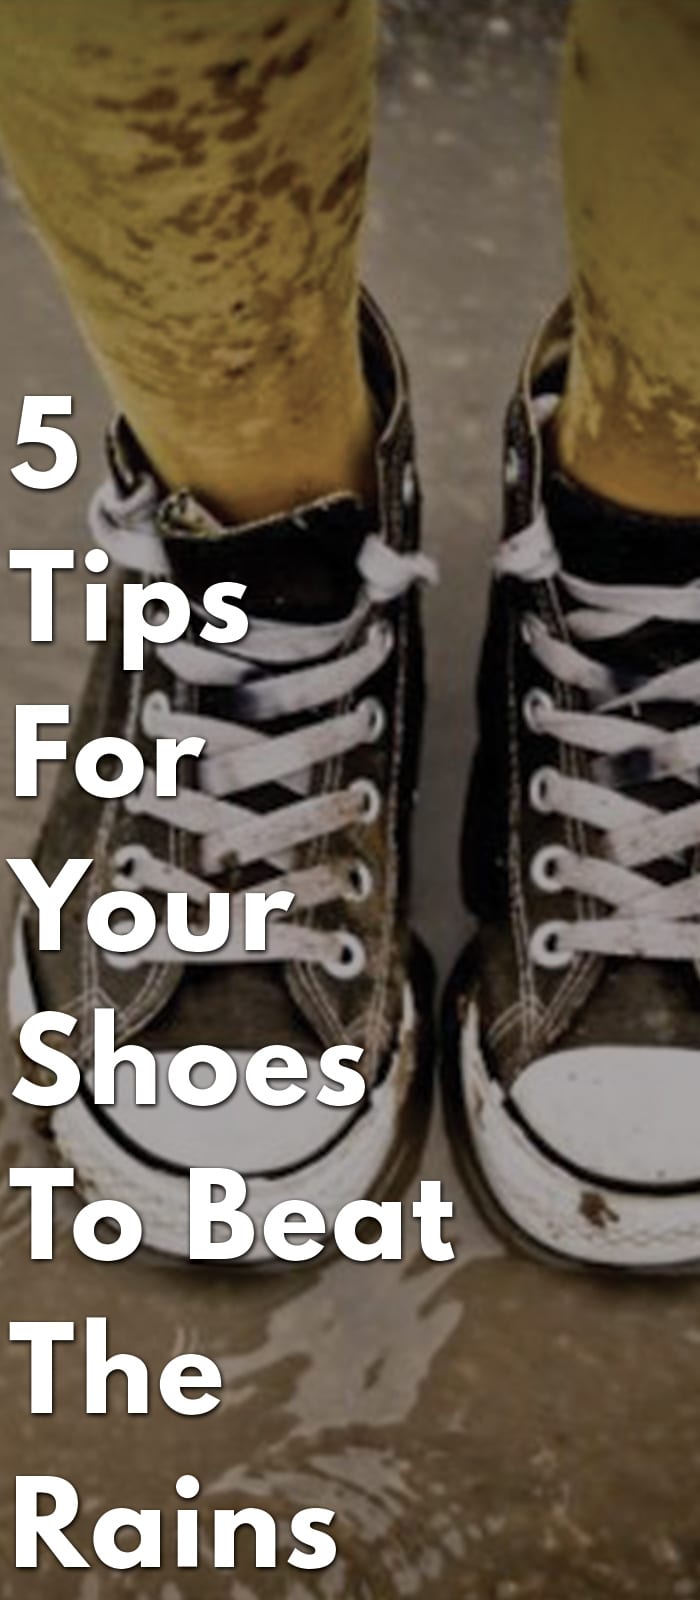 5-Tips-For-Your-Shoes-To-Beat-The-Rains